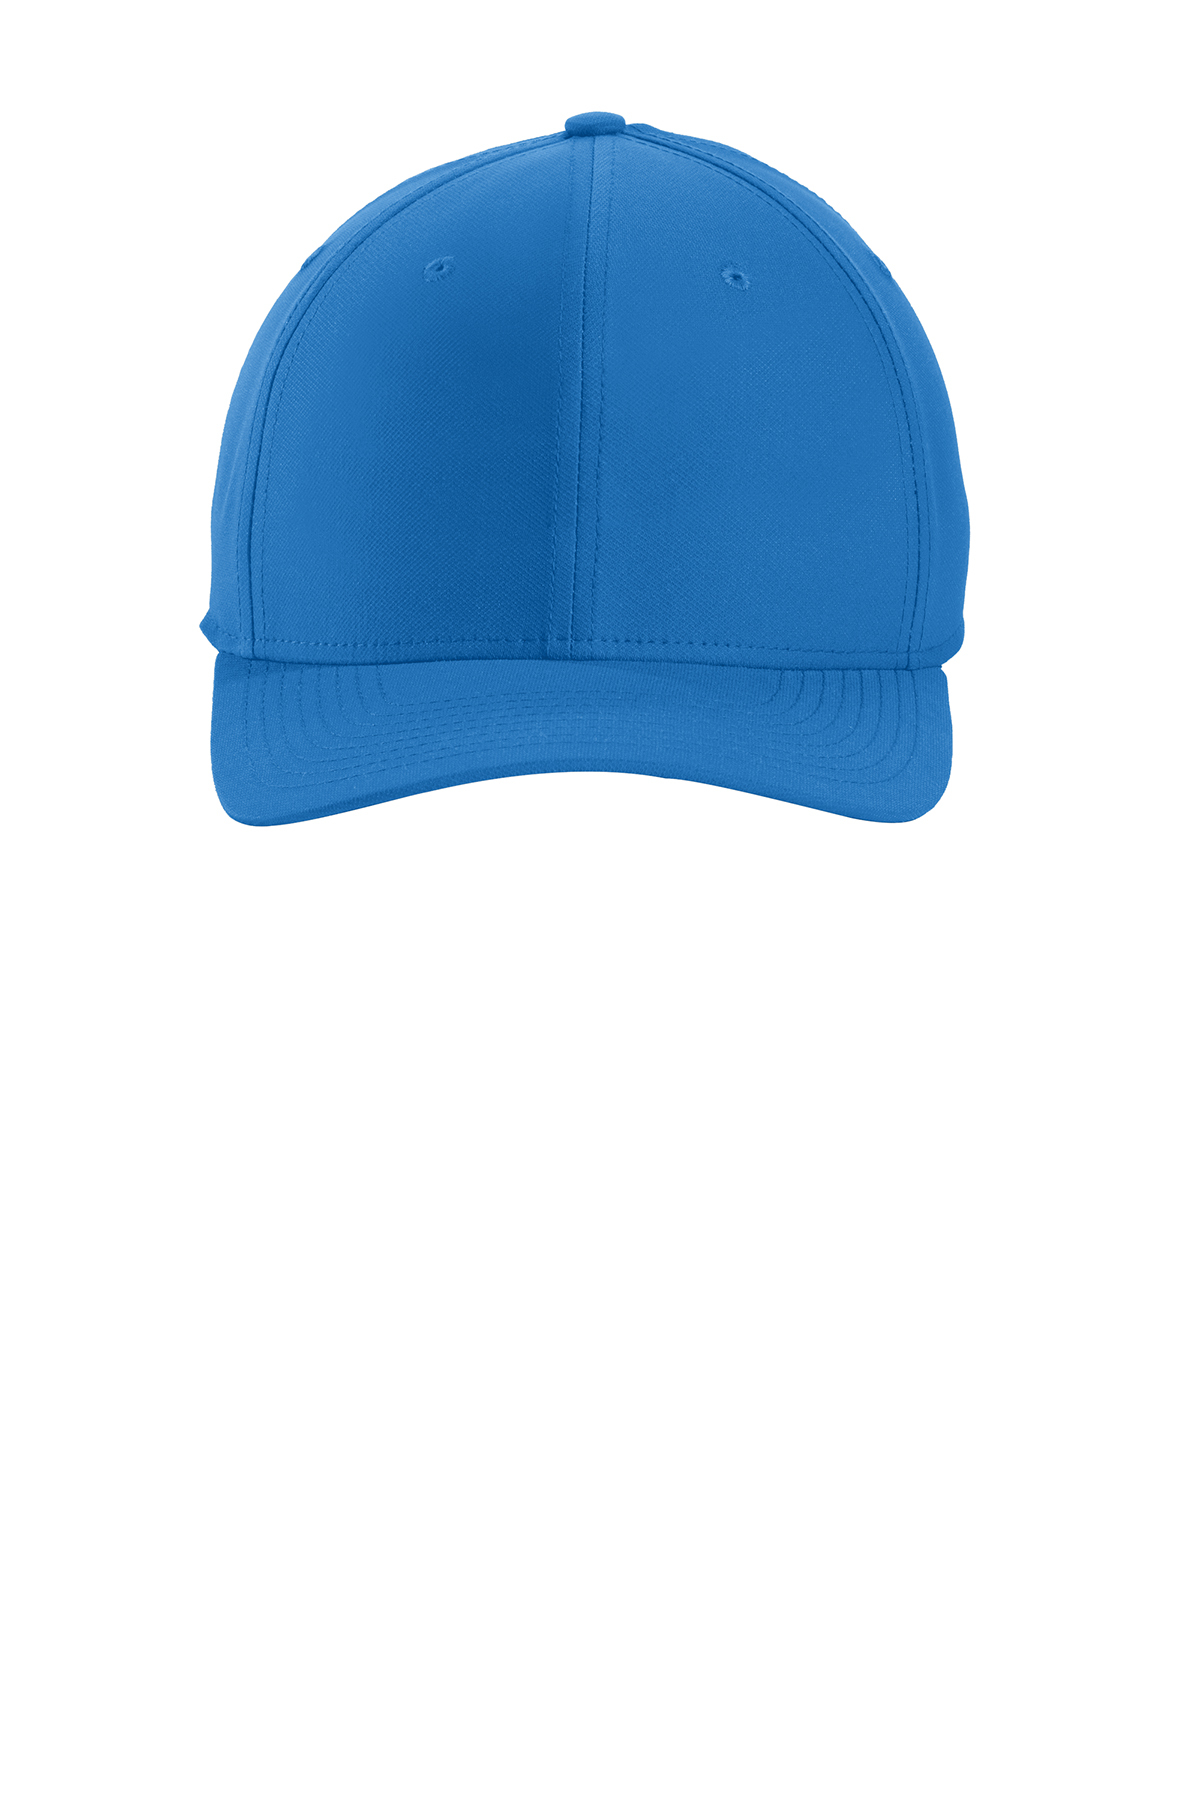 What does cap mean and what is the blue cap emoji?